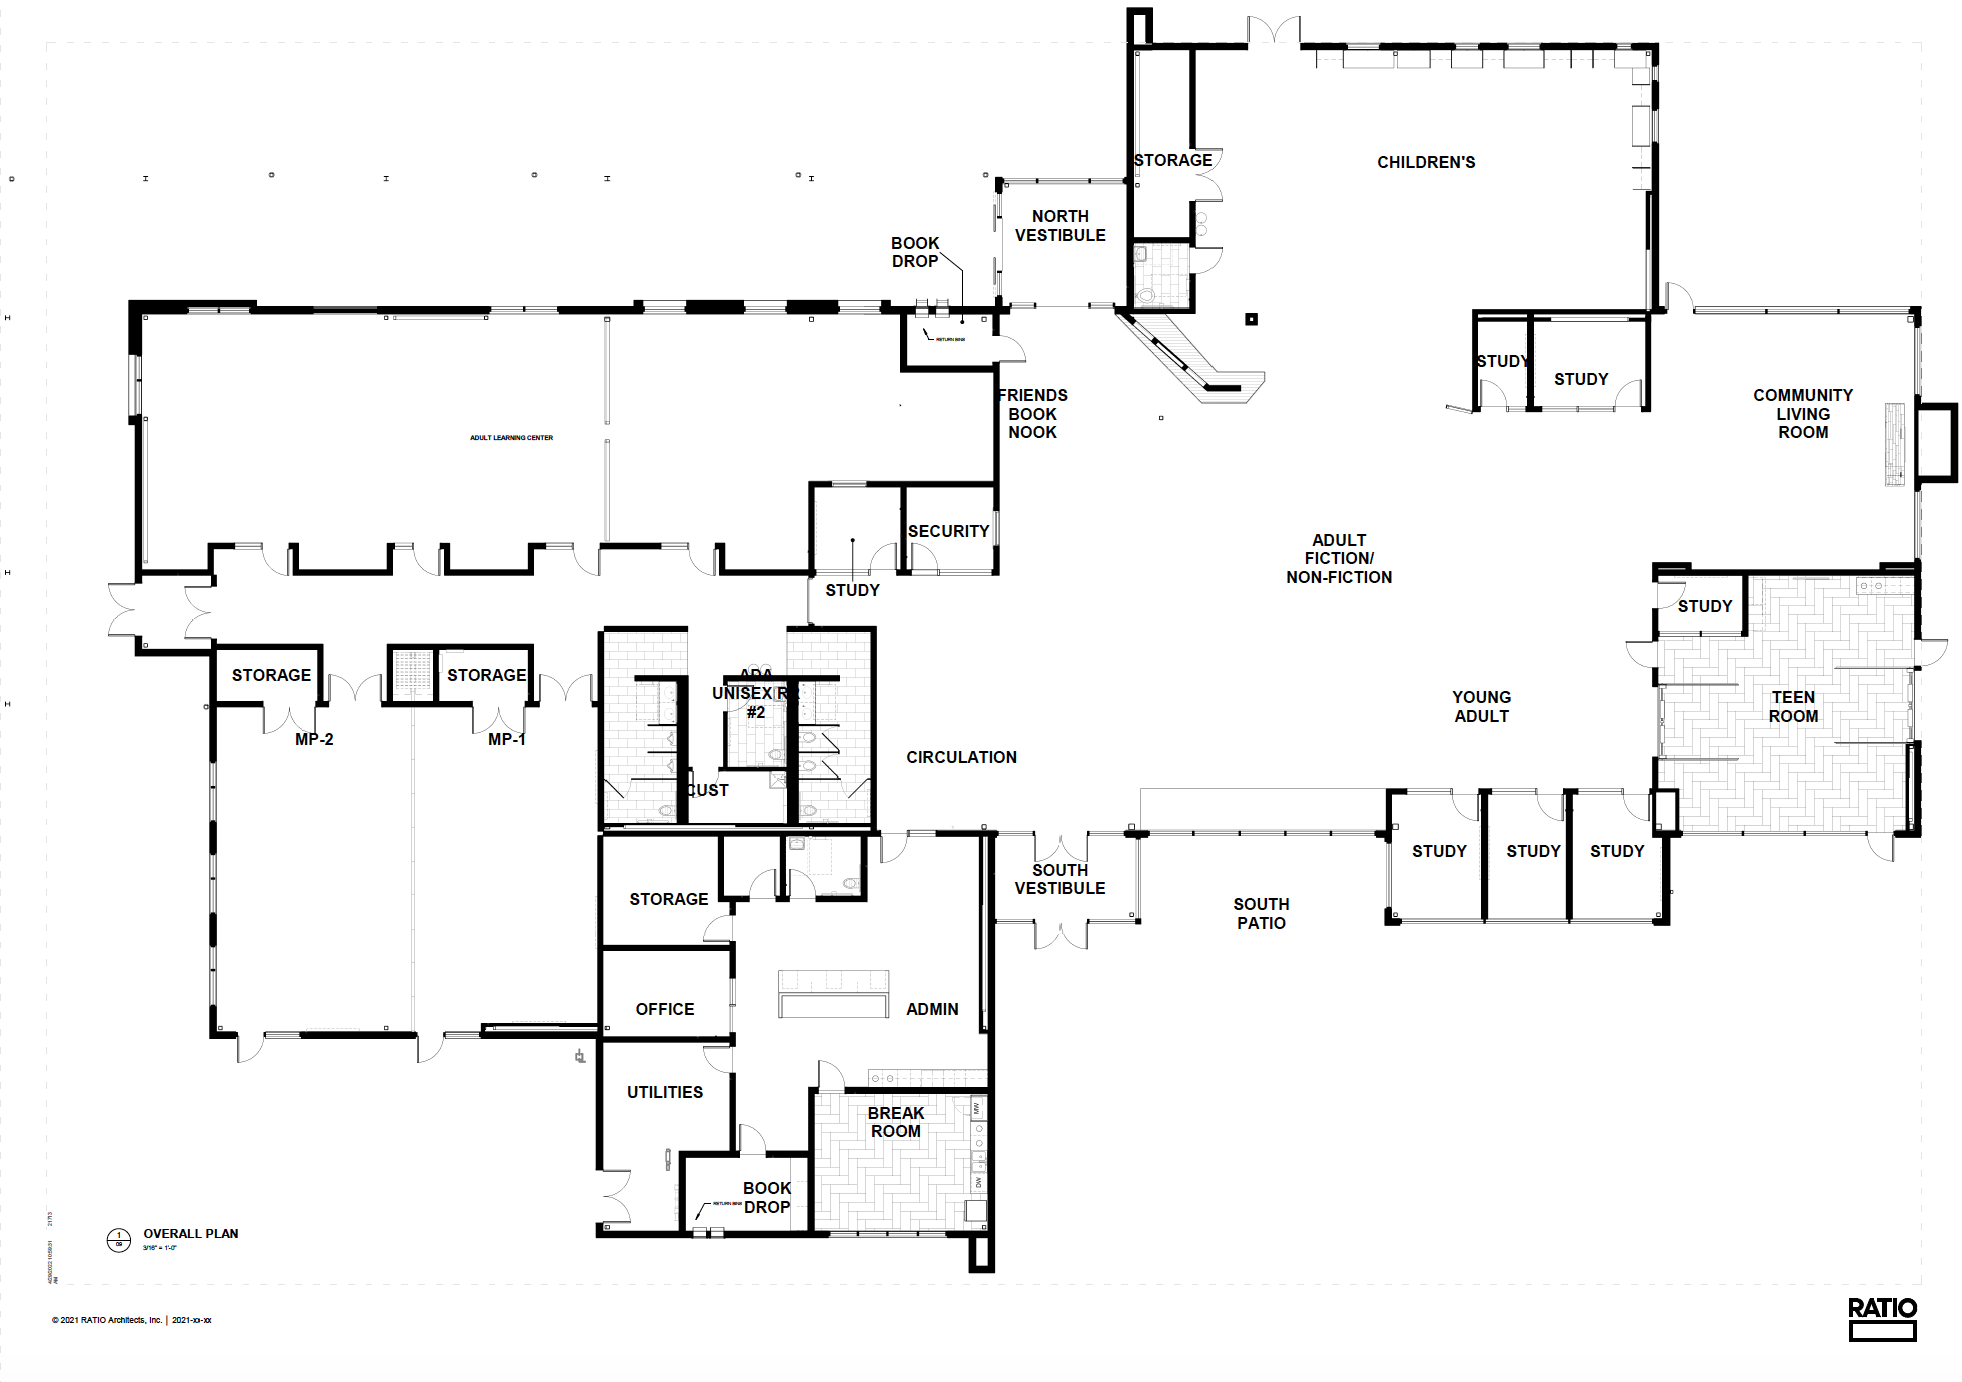 Clifton Branch Library Project - Floor Plan